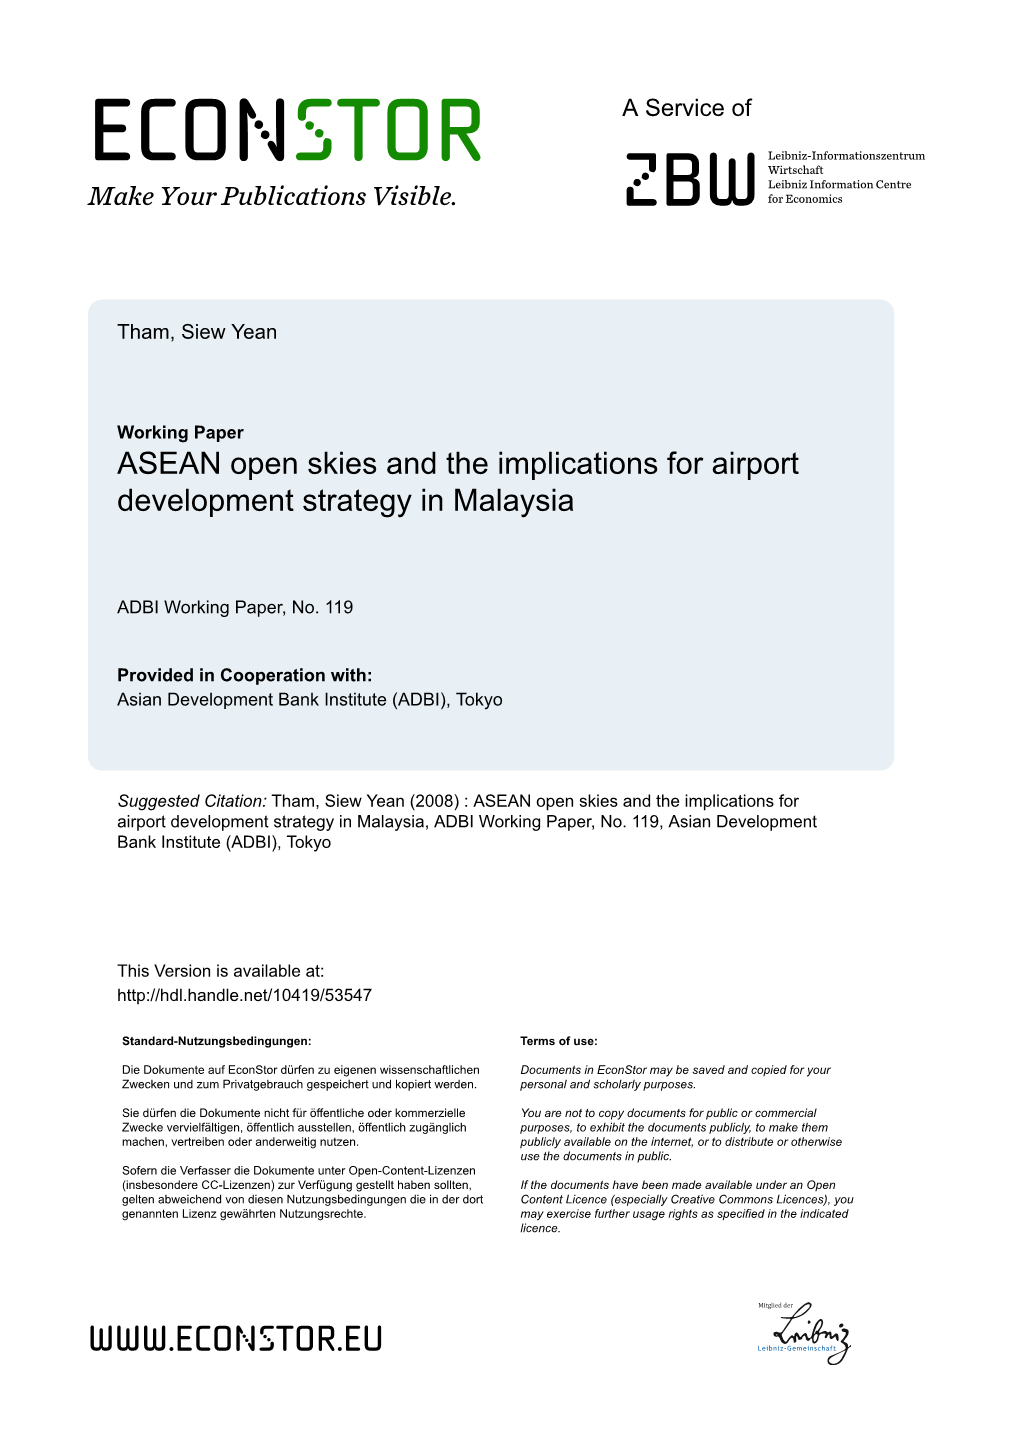 ASEAN Open Skies and the Implications for Airport Development Strategy in Malaysia